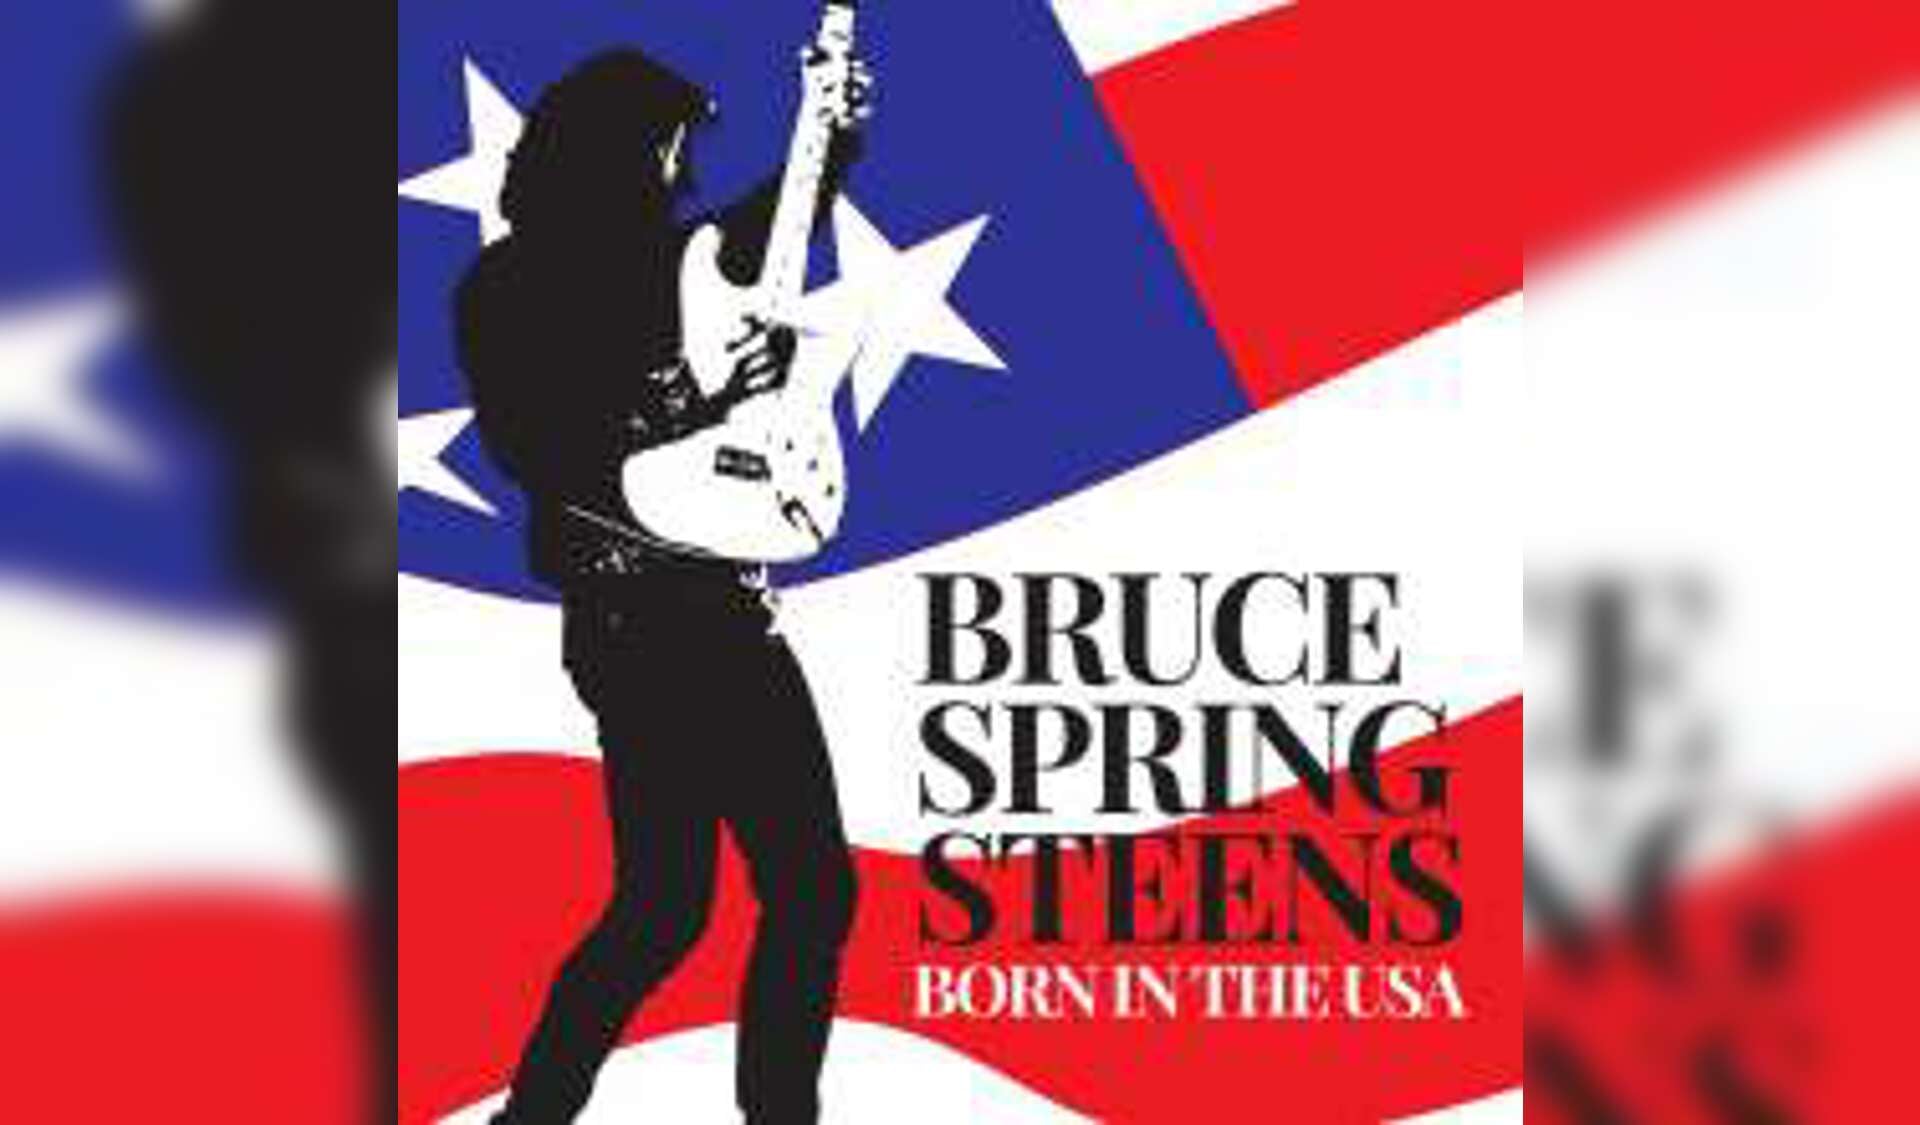 Bruce Springsteens Born in the U.S.A.